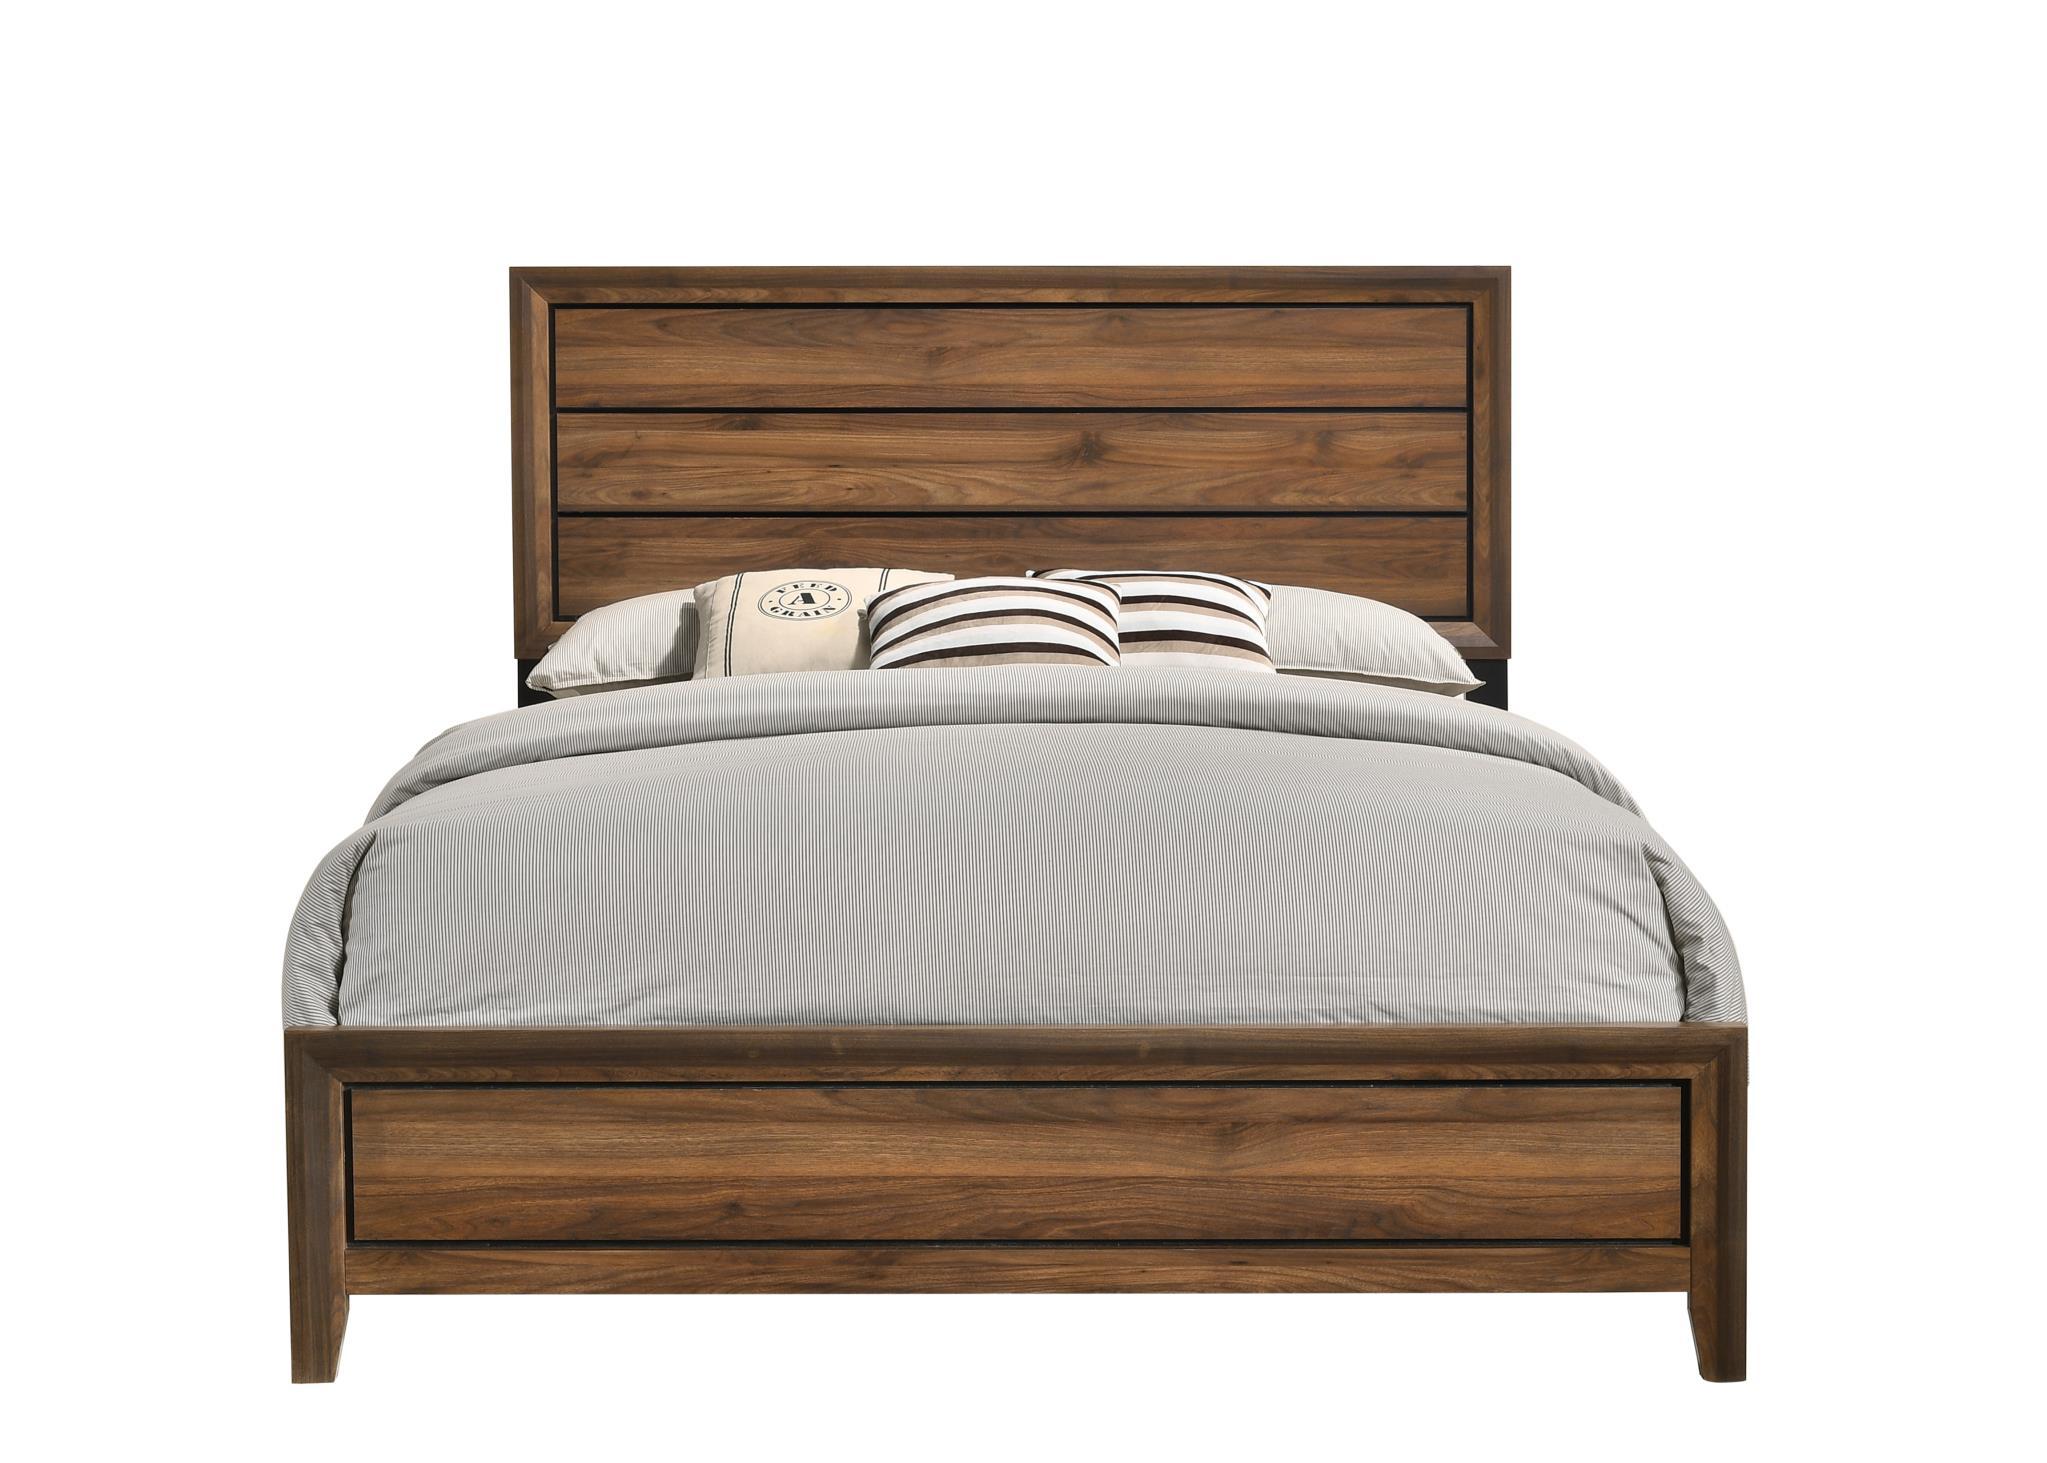 Modern, Transitional Beds KENNEDY 1372-105 1372-105 in Brown 